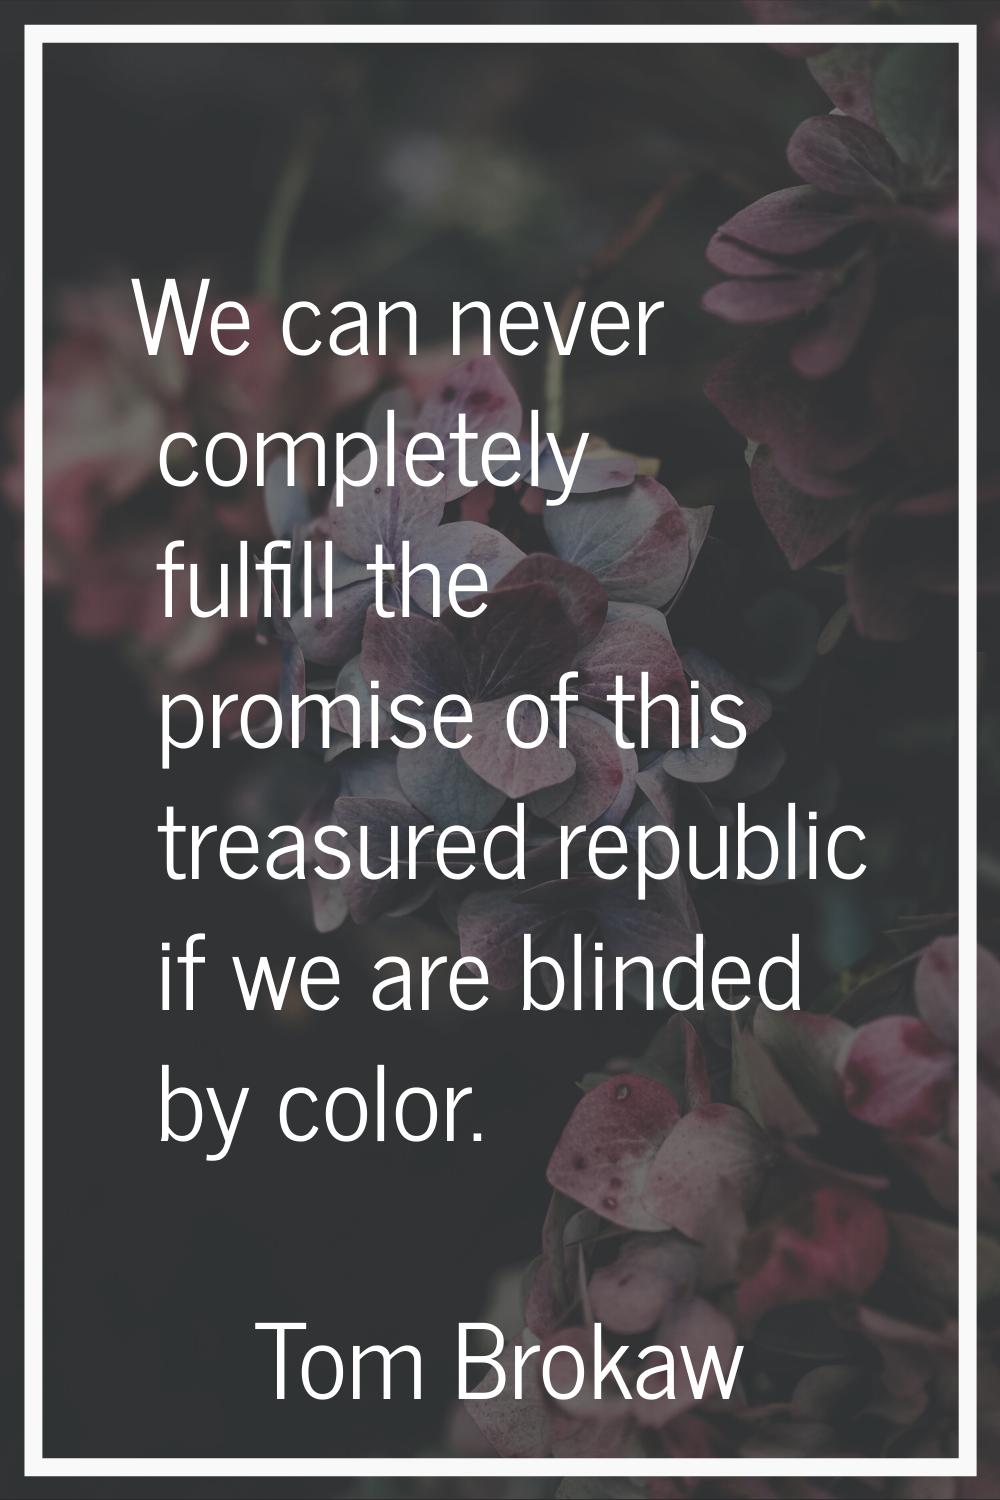 We can never completely fulfill the promise of this treasured republic if we are blinded by color.